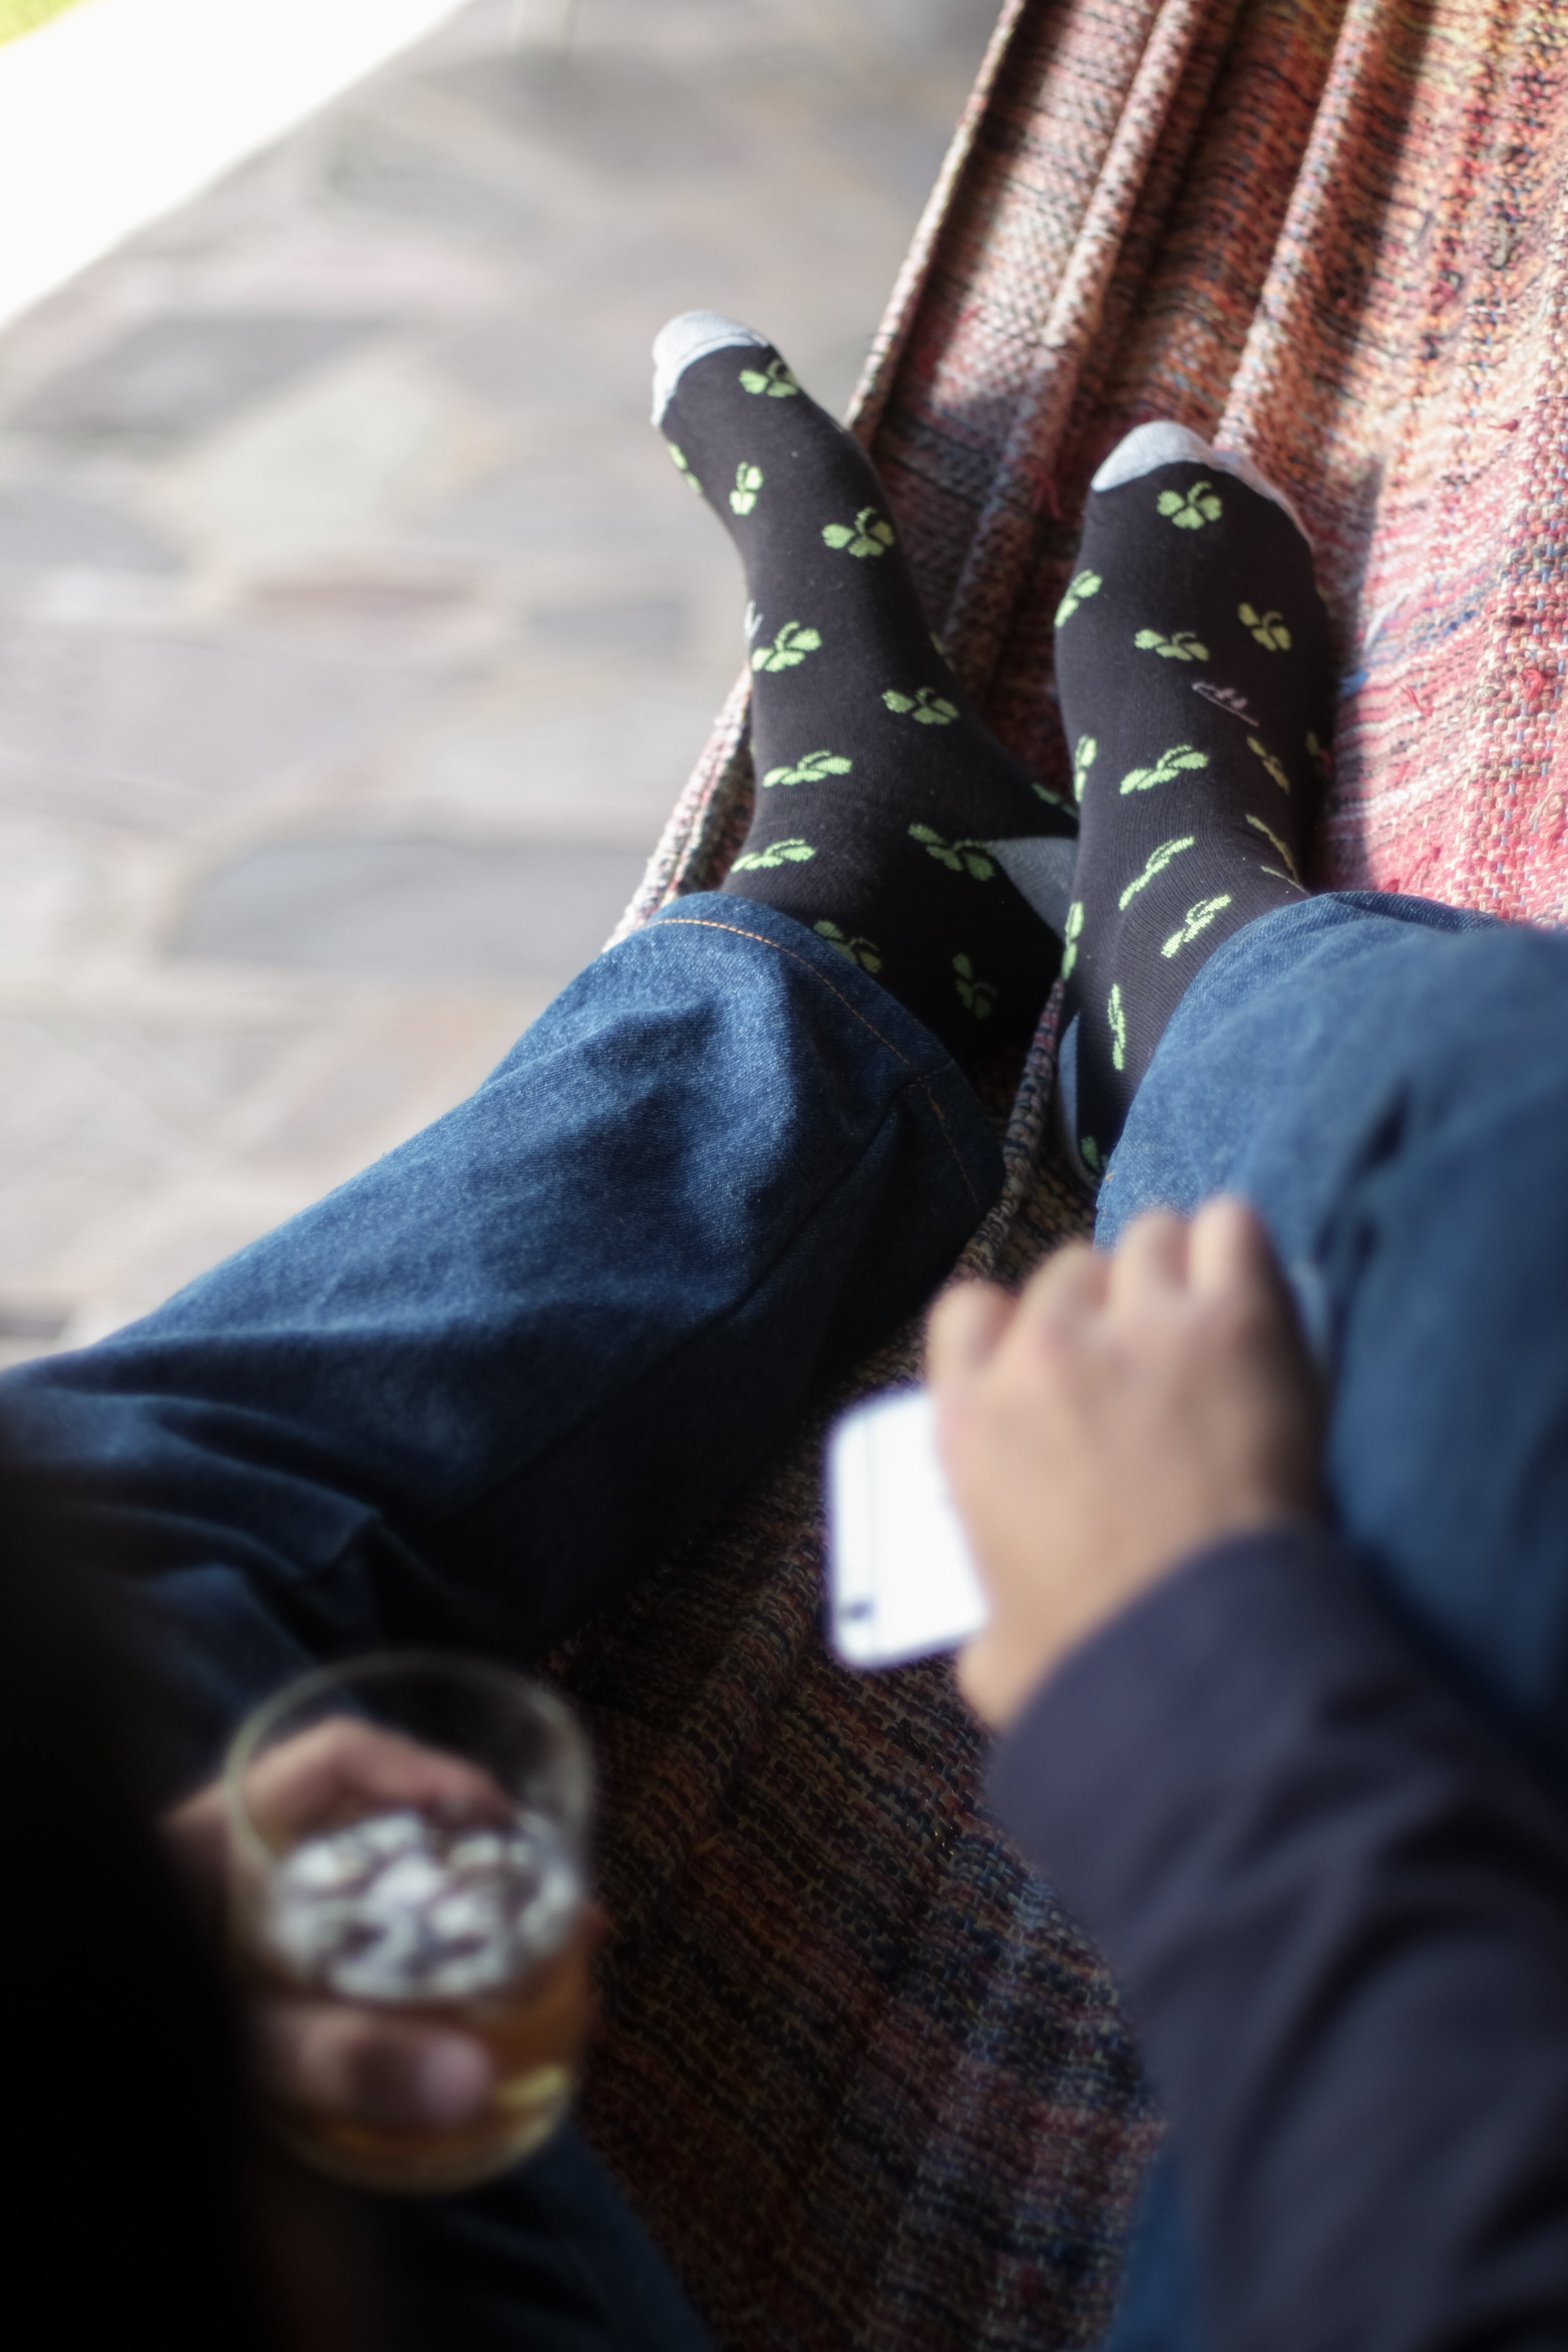 black over the calf dress socks with green clover pattern light grey toe and heel, blue jeans